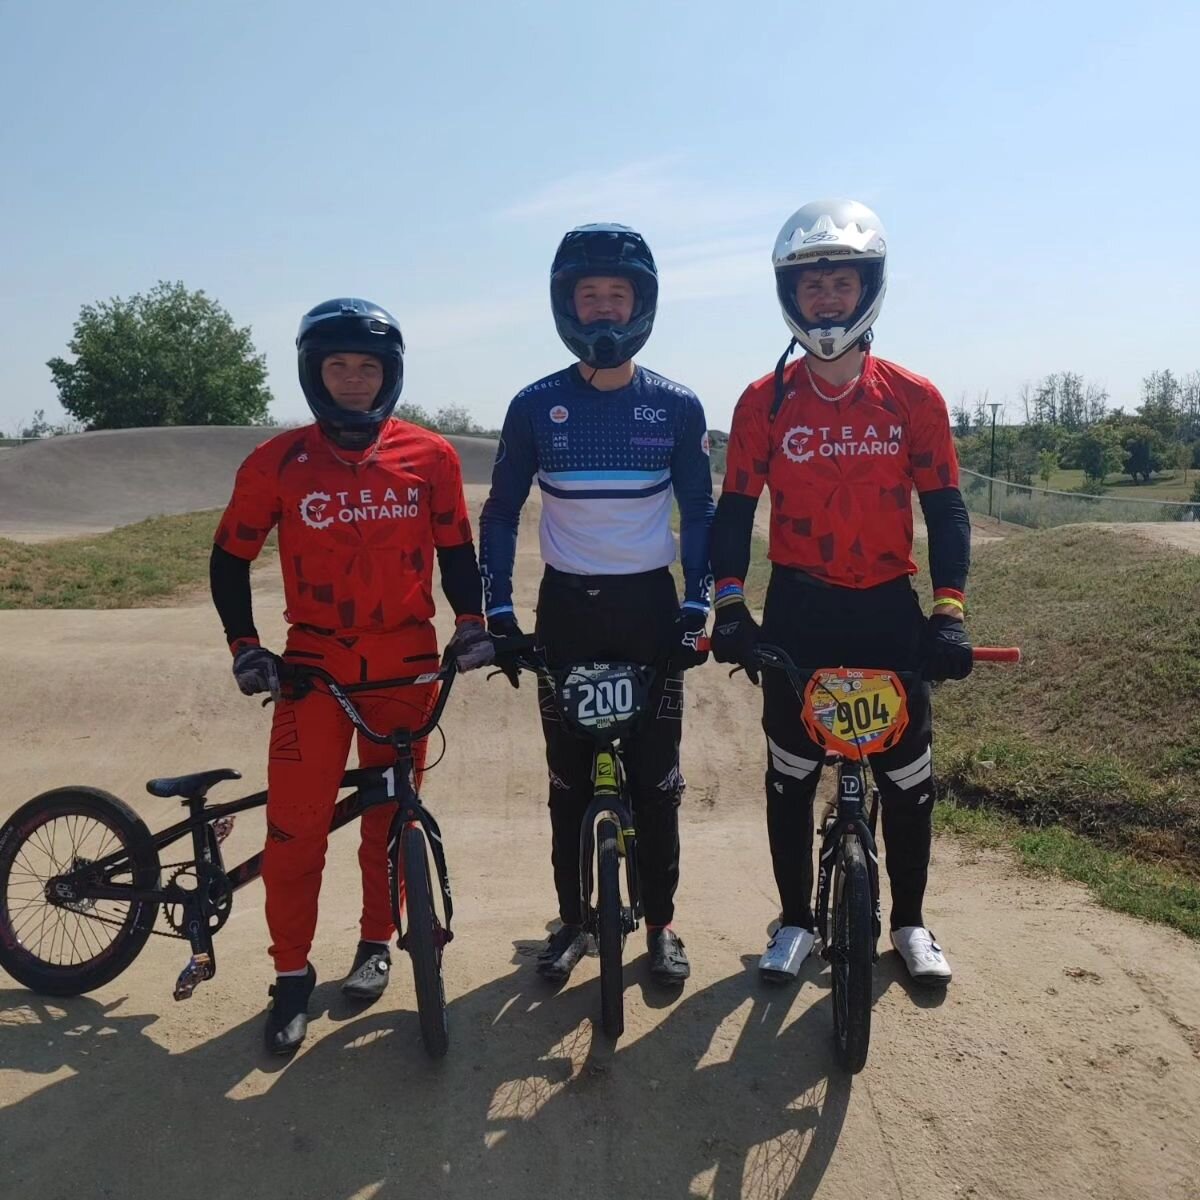 🇨🇦 BMX riders from across Canada are starting to arrive for the Canada Cup races happening this weekend. Official practice starts tomorrow Friday Aug. 18th at 6pm. See you there 🙂 🏁